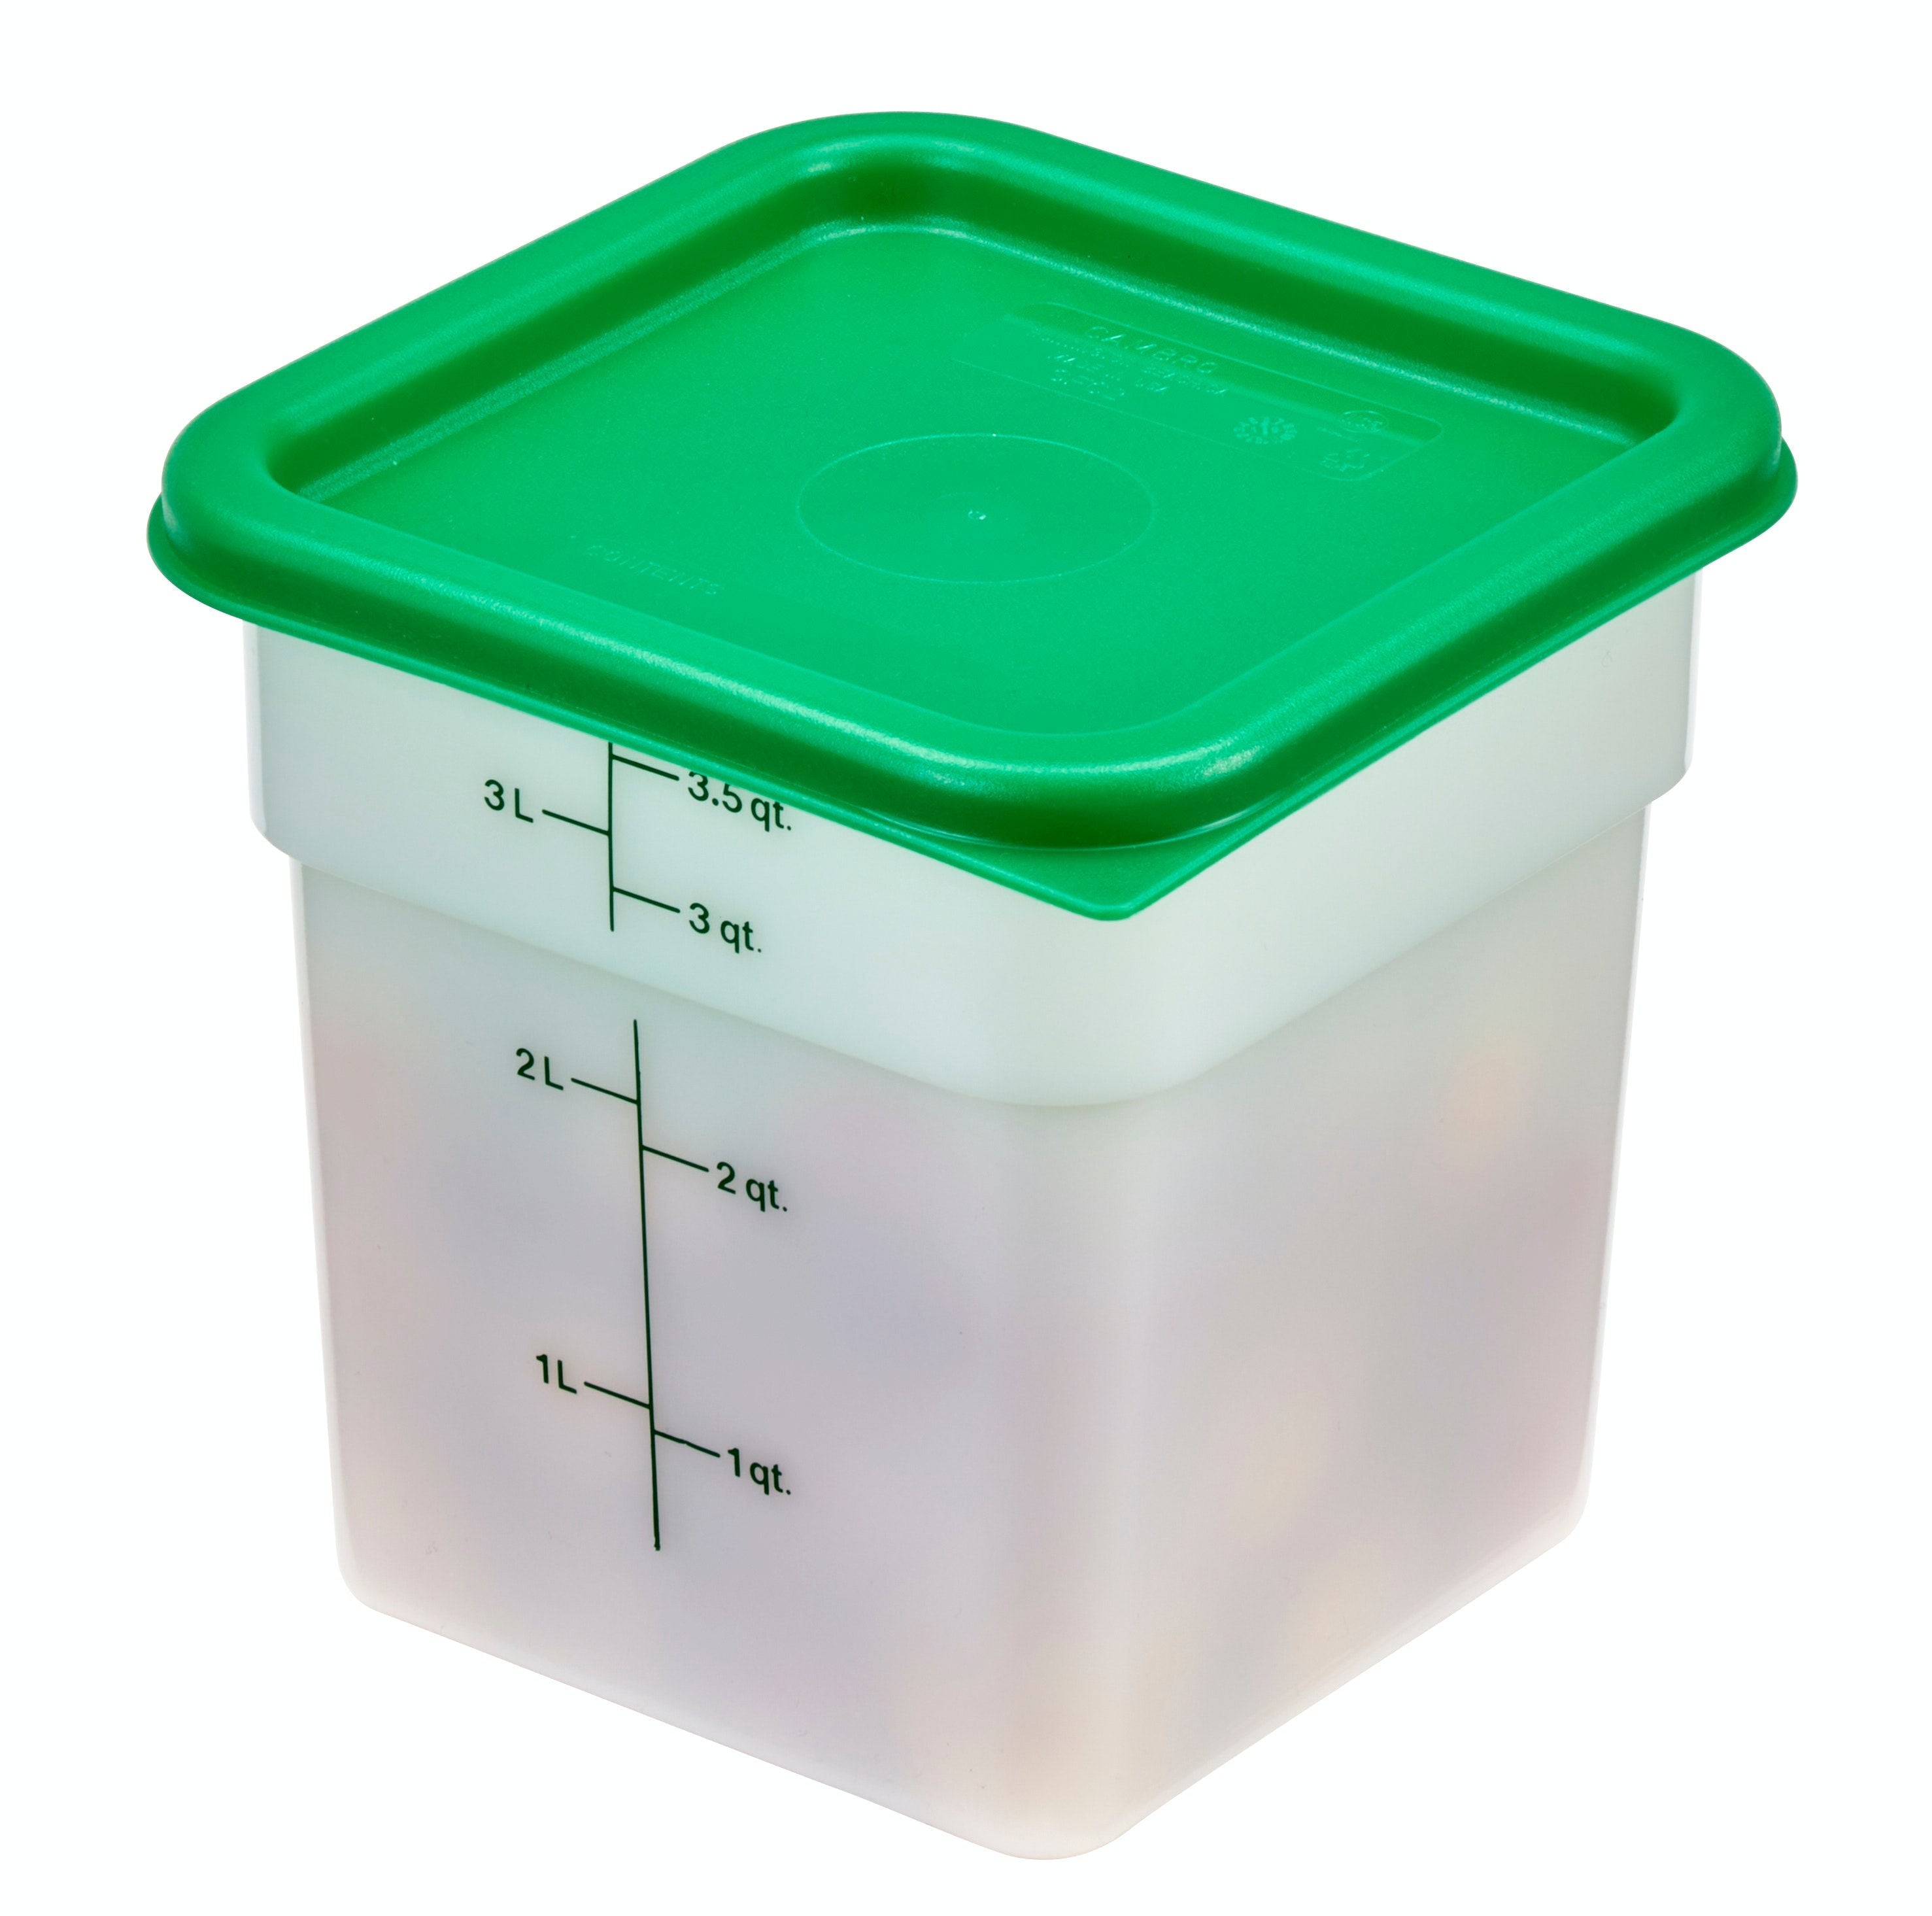 https://bigerics.com/cdn/shop/products/SKU-CAMBRO-MANUFACTURING-KITCHEN-Cambro-Square-4Qt-Container-with-Lid-Grab-N-Go-3-Pack-4SFSPPSW3190-product_name-Food-Storage-Container-product_size.jpg?v=1663876252